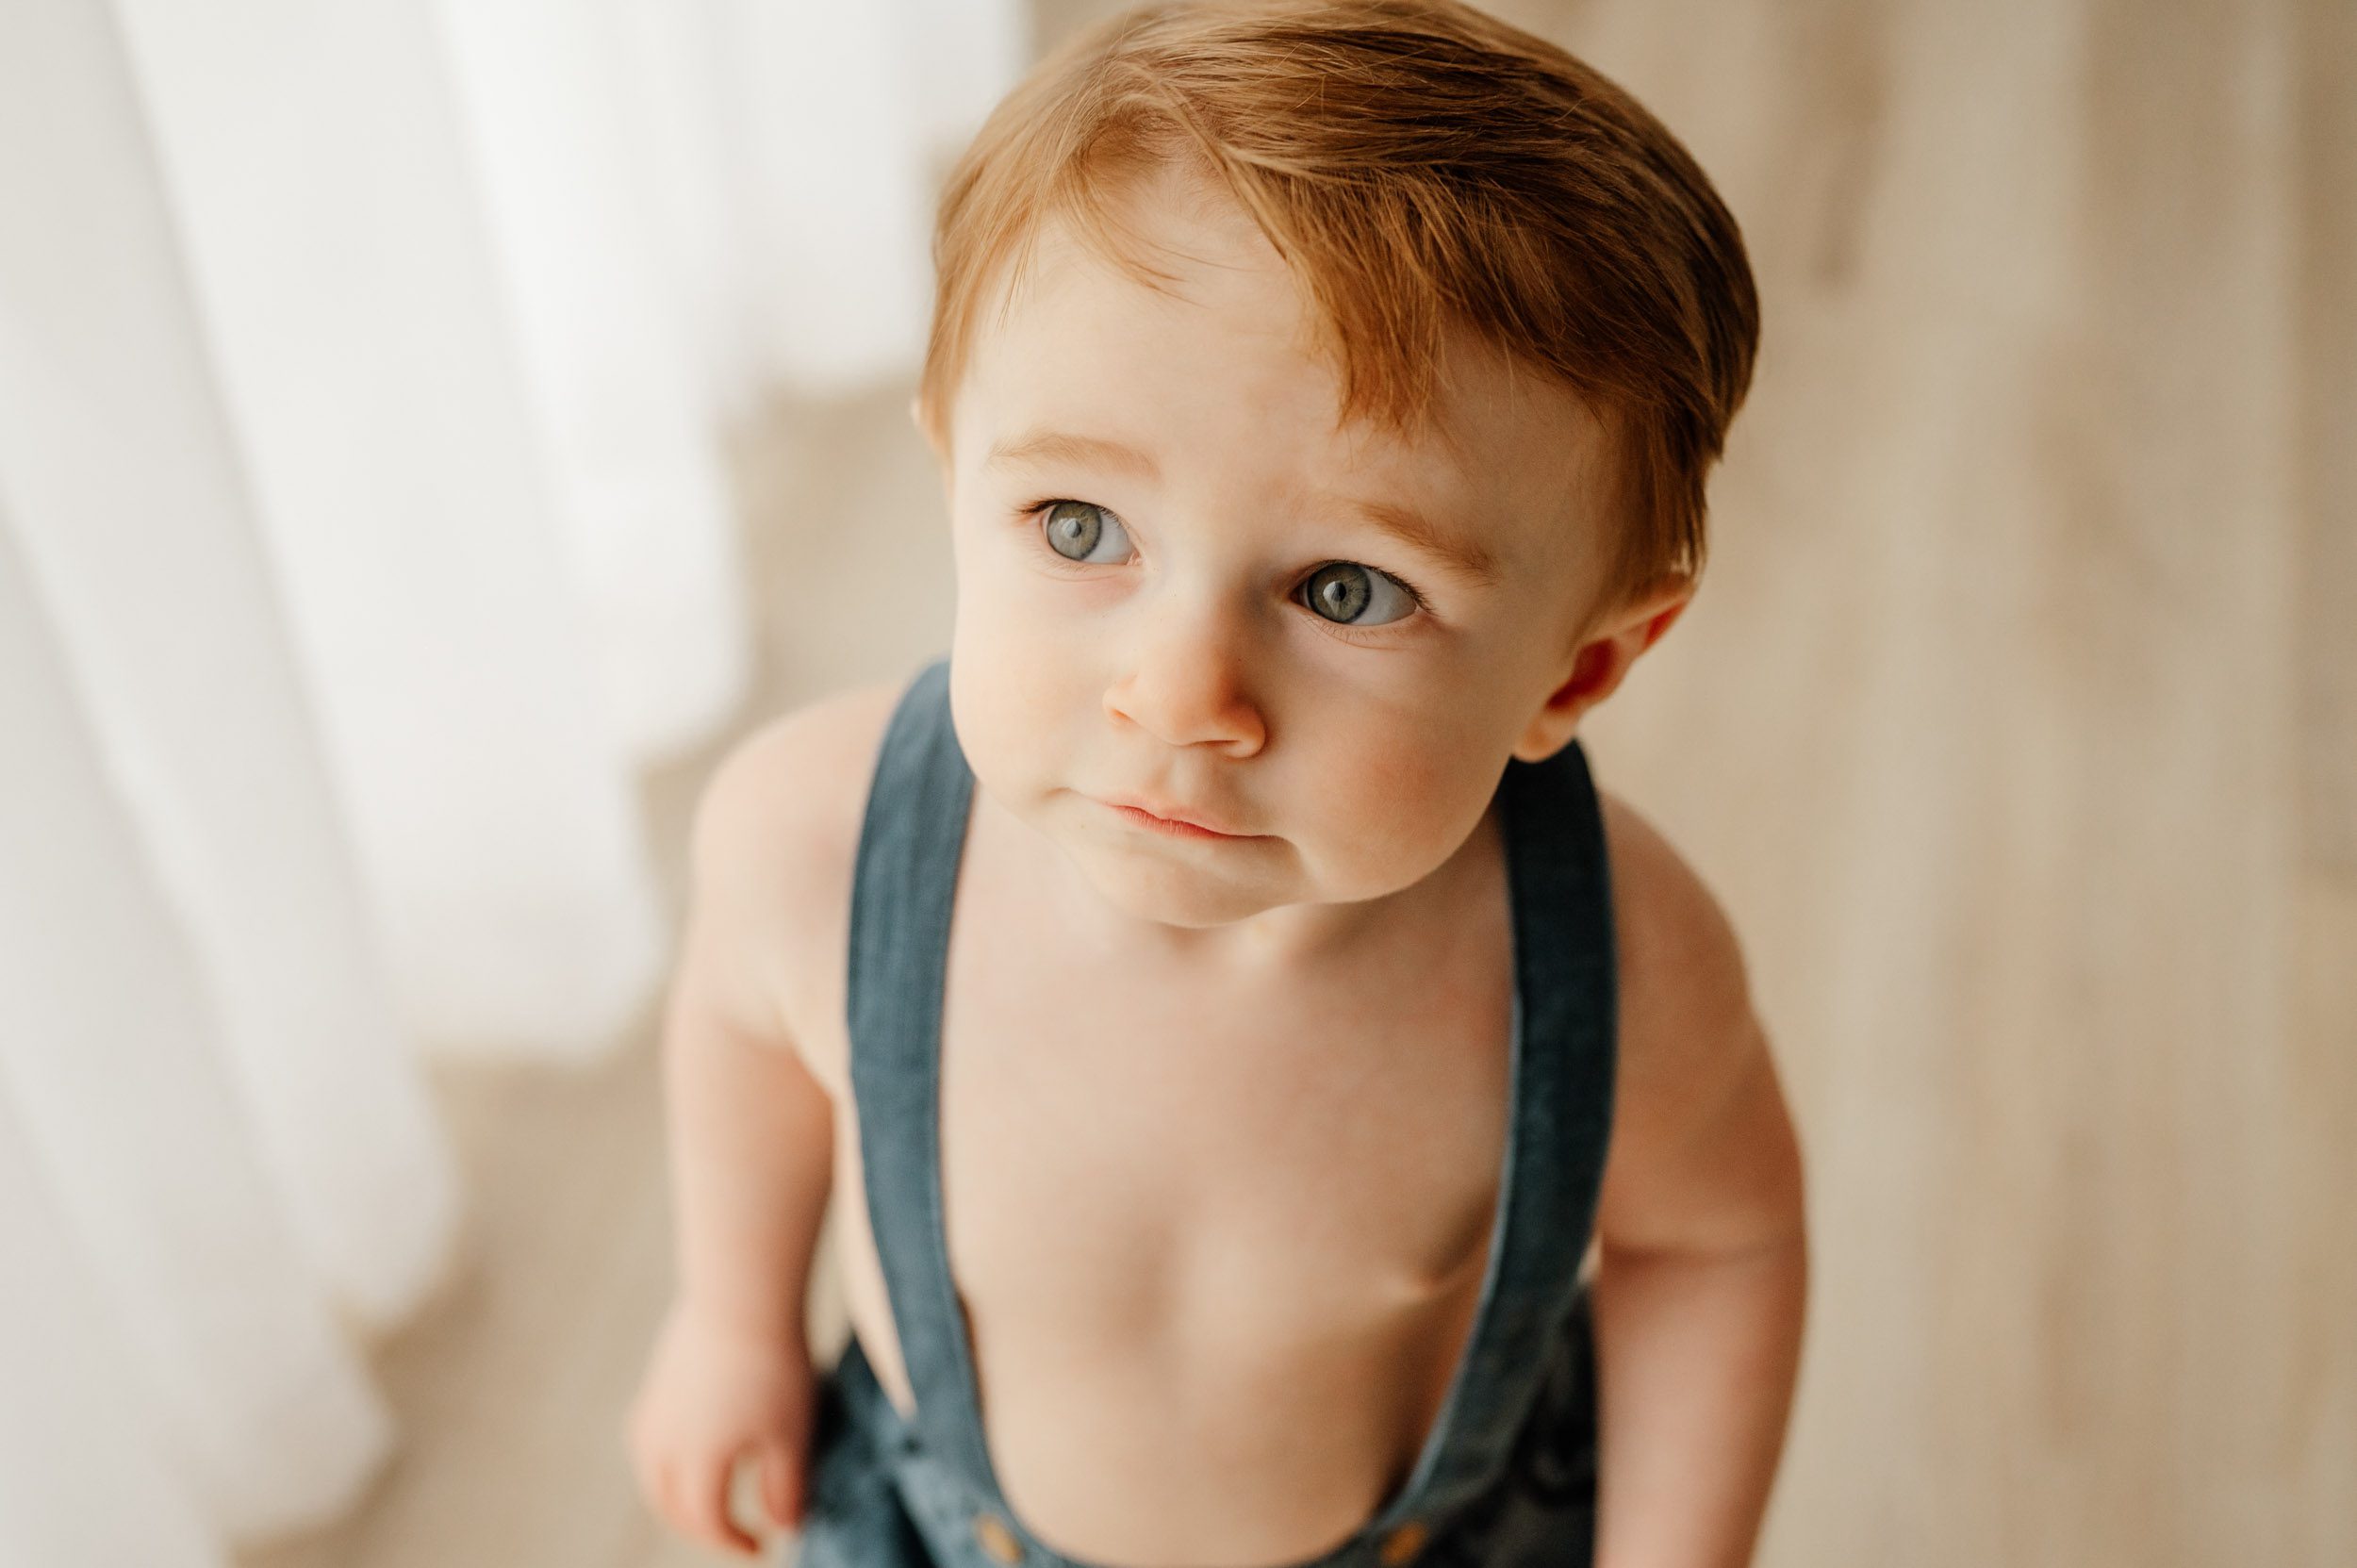 a picture of a young boy taken from above as he looks off to the side and the light catches the corner of his eyes during a 1st birthday photo session